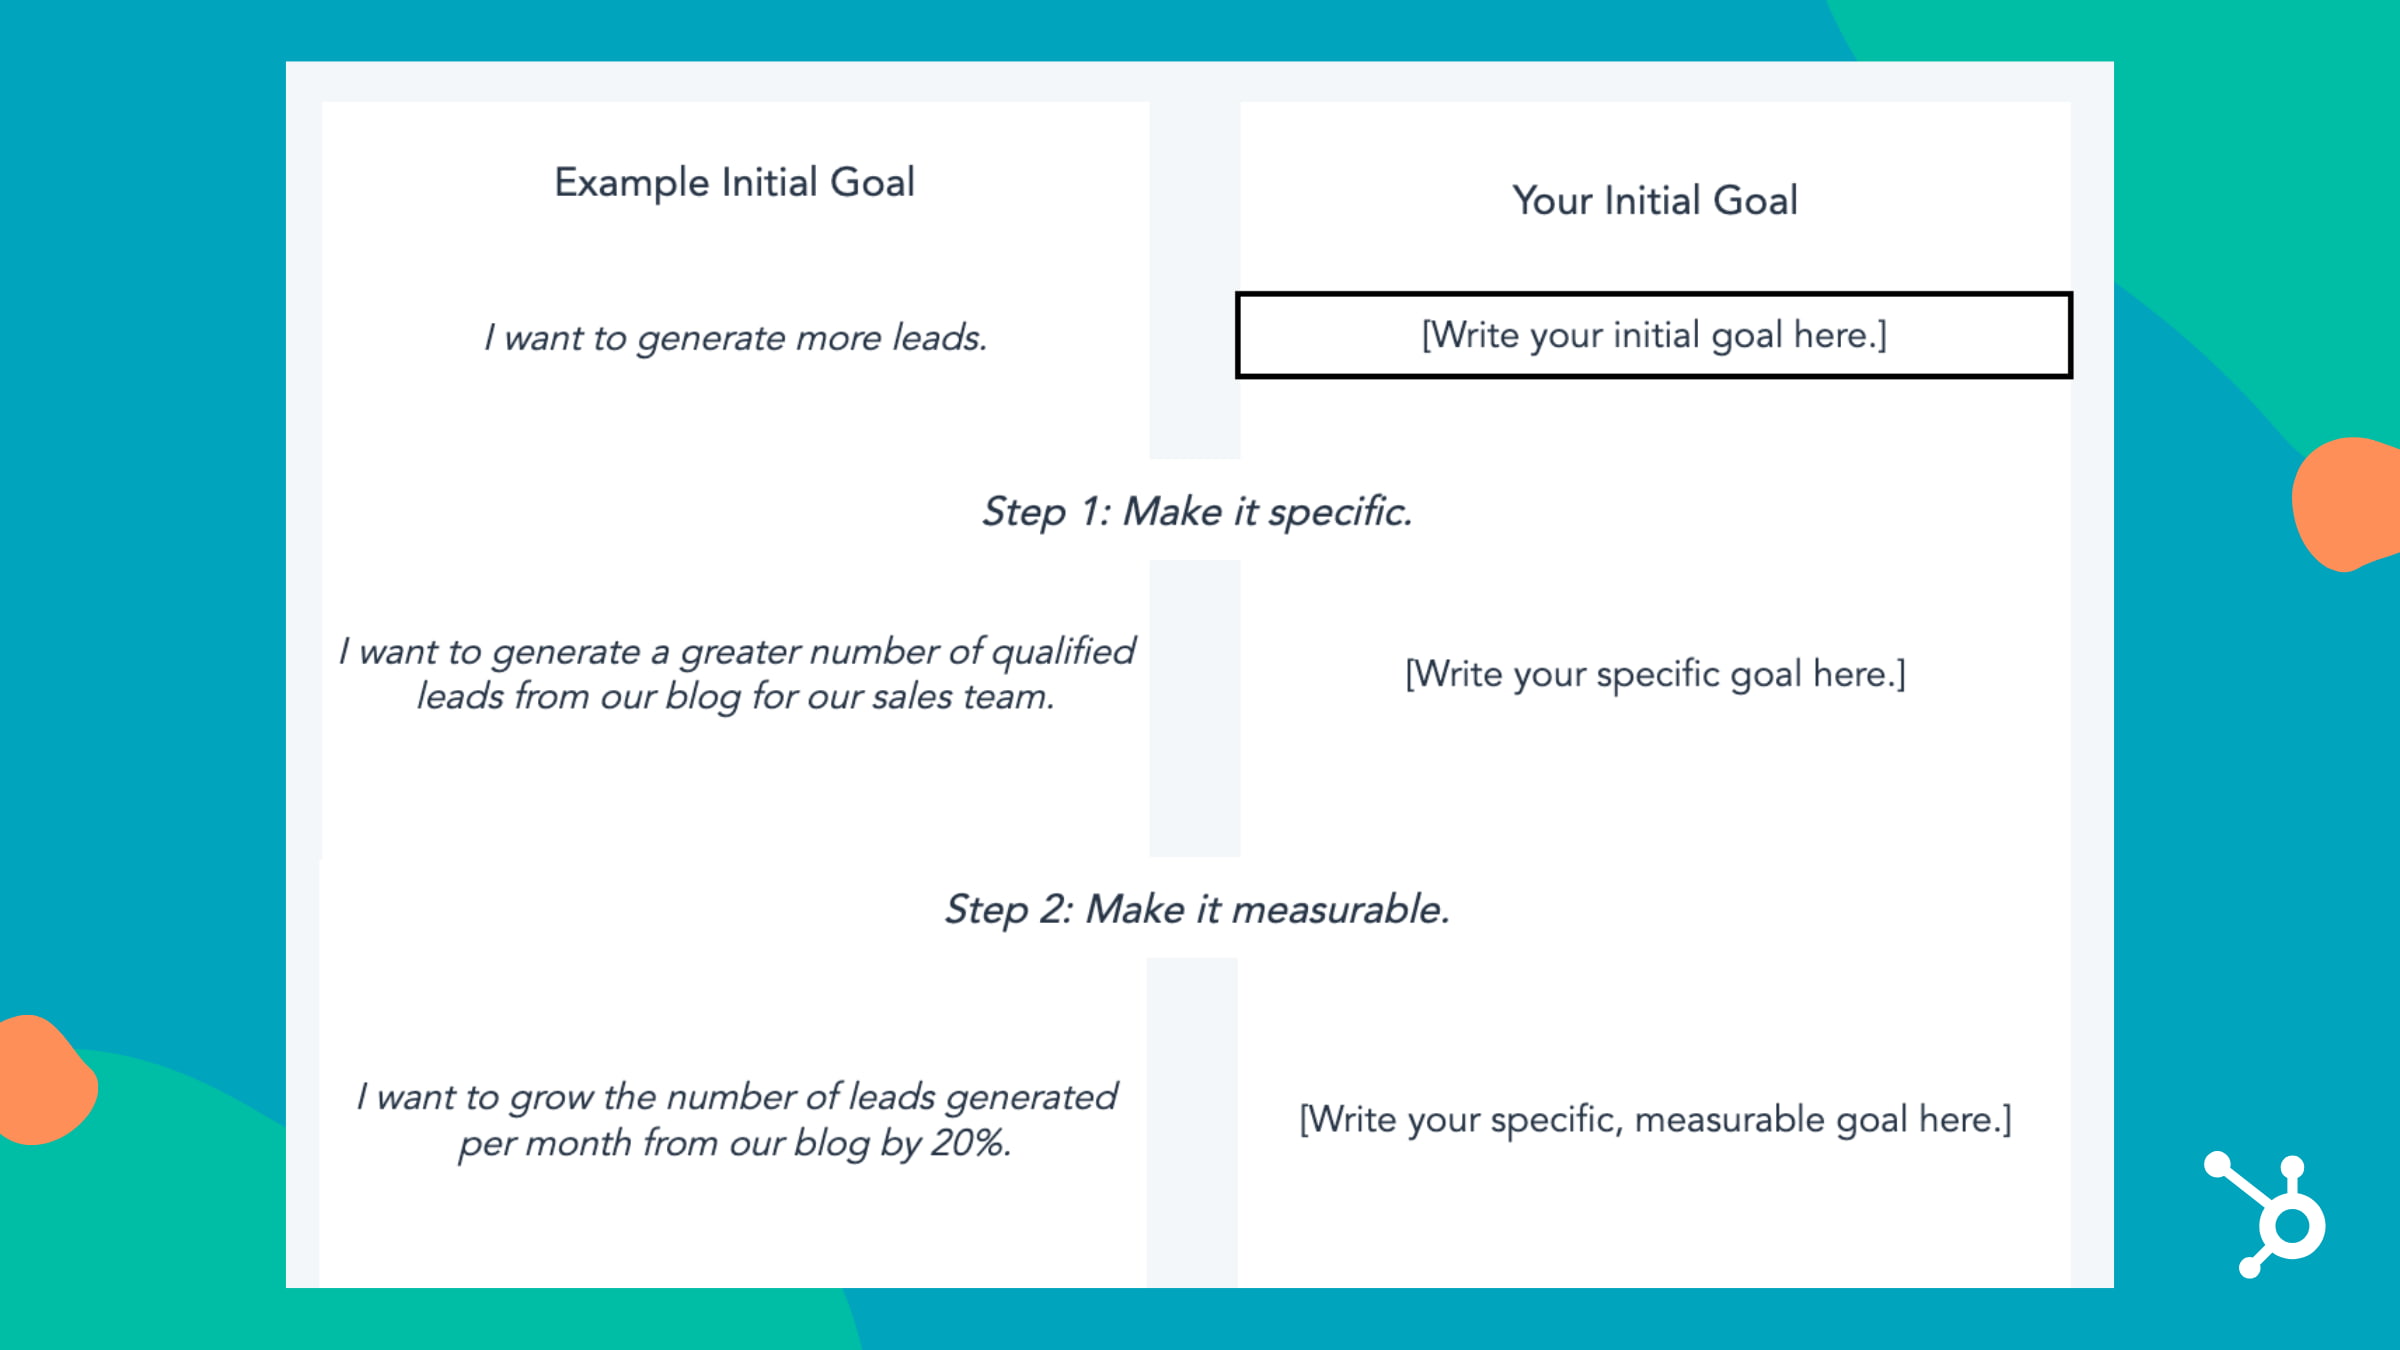 Example goal setting template section used to outline initial goals